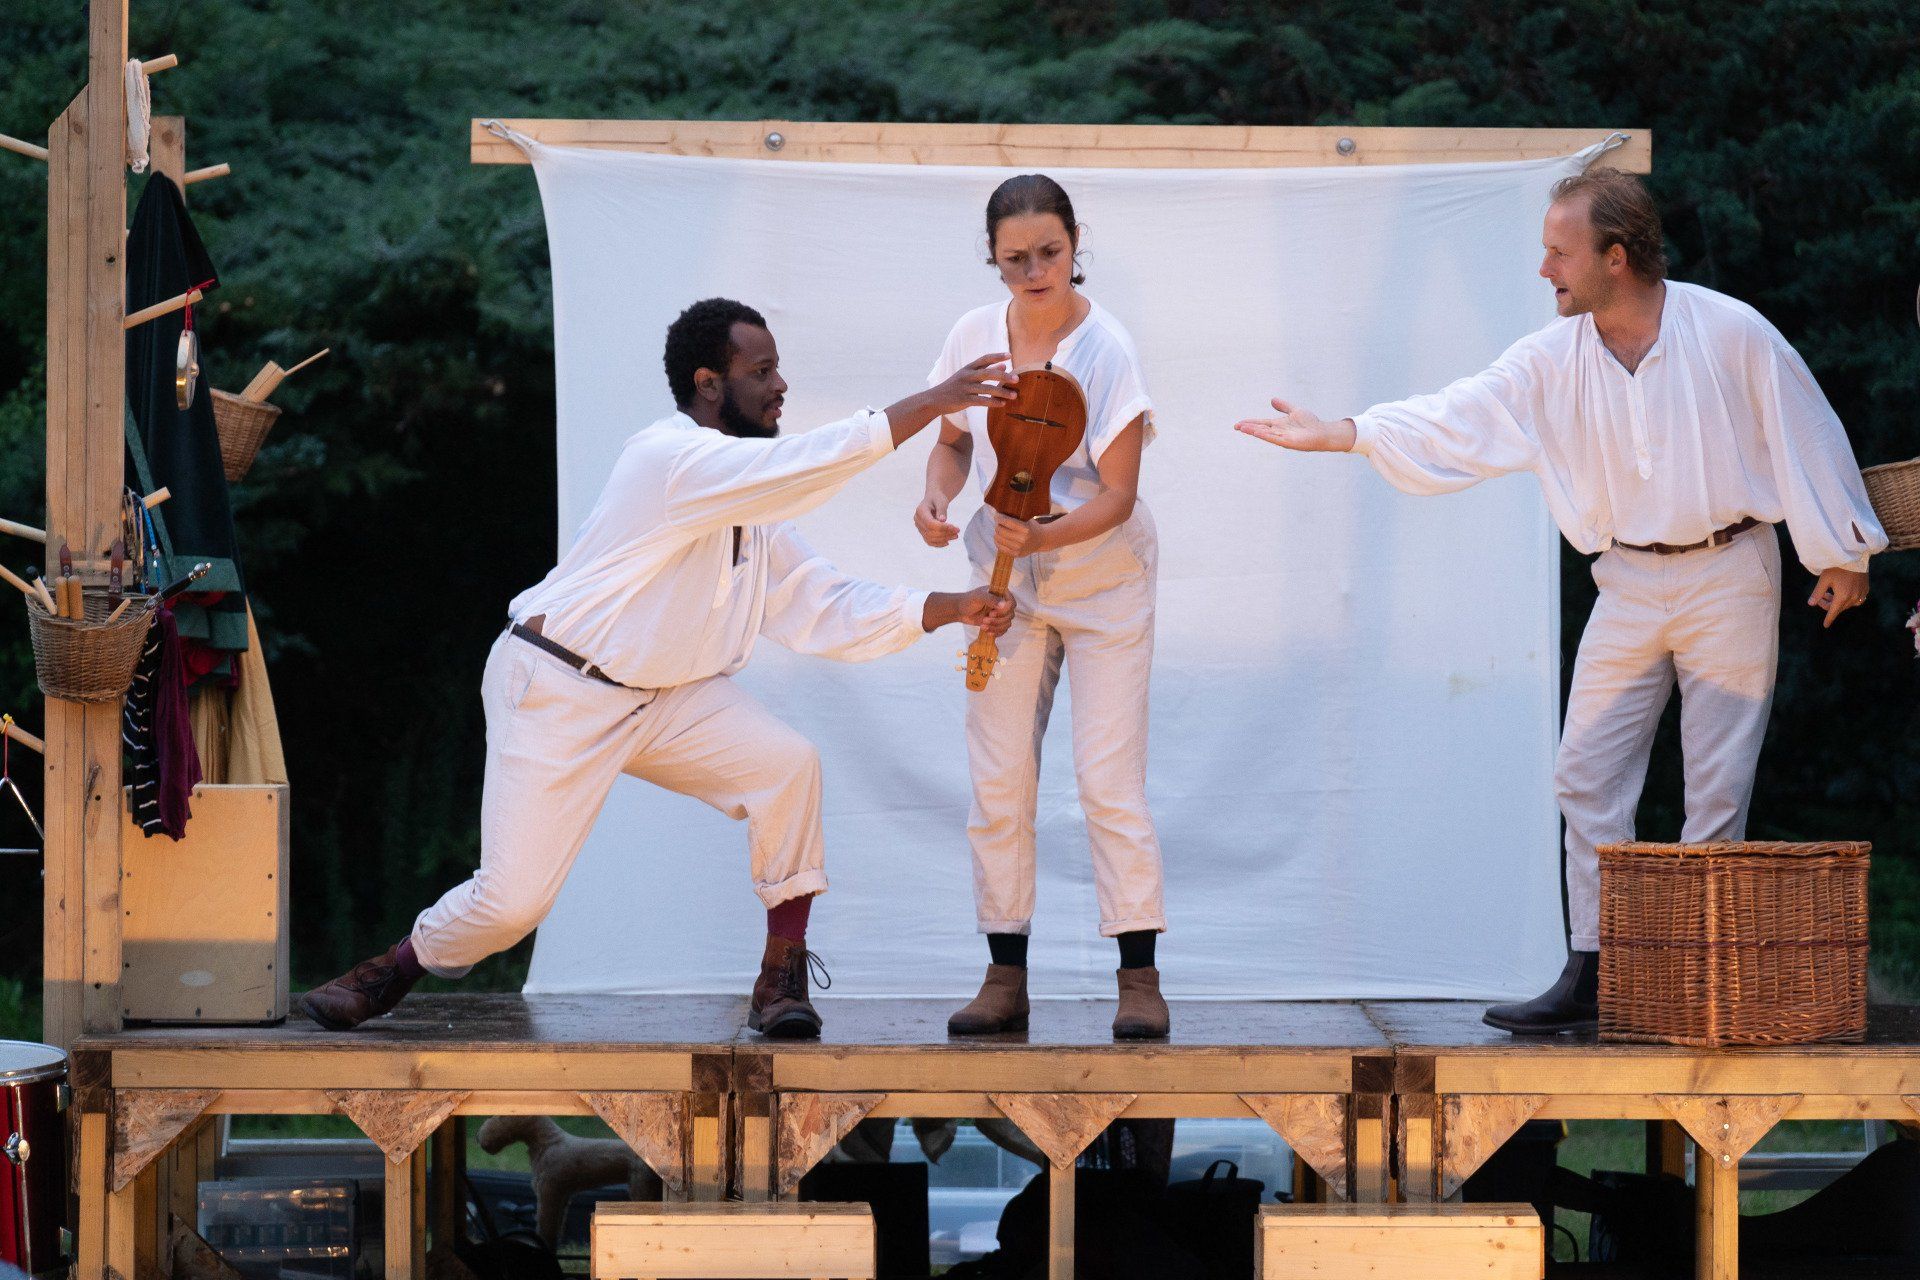 Check out the photos of 'A Midsummer Night's Dream